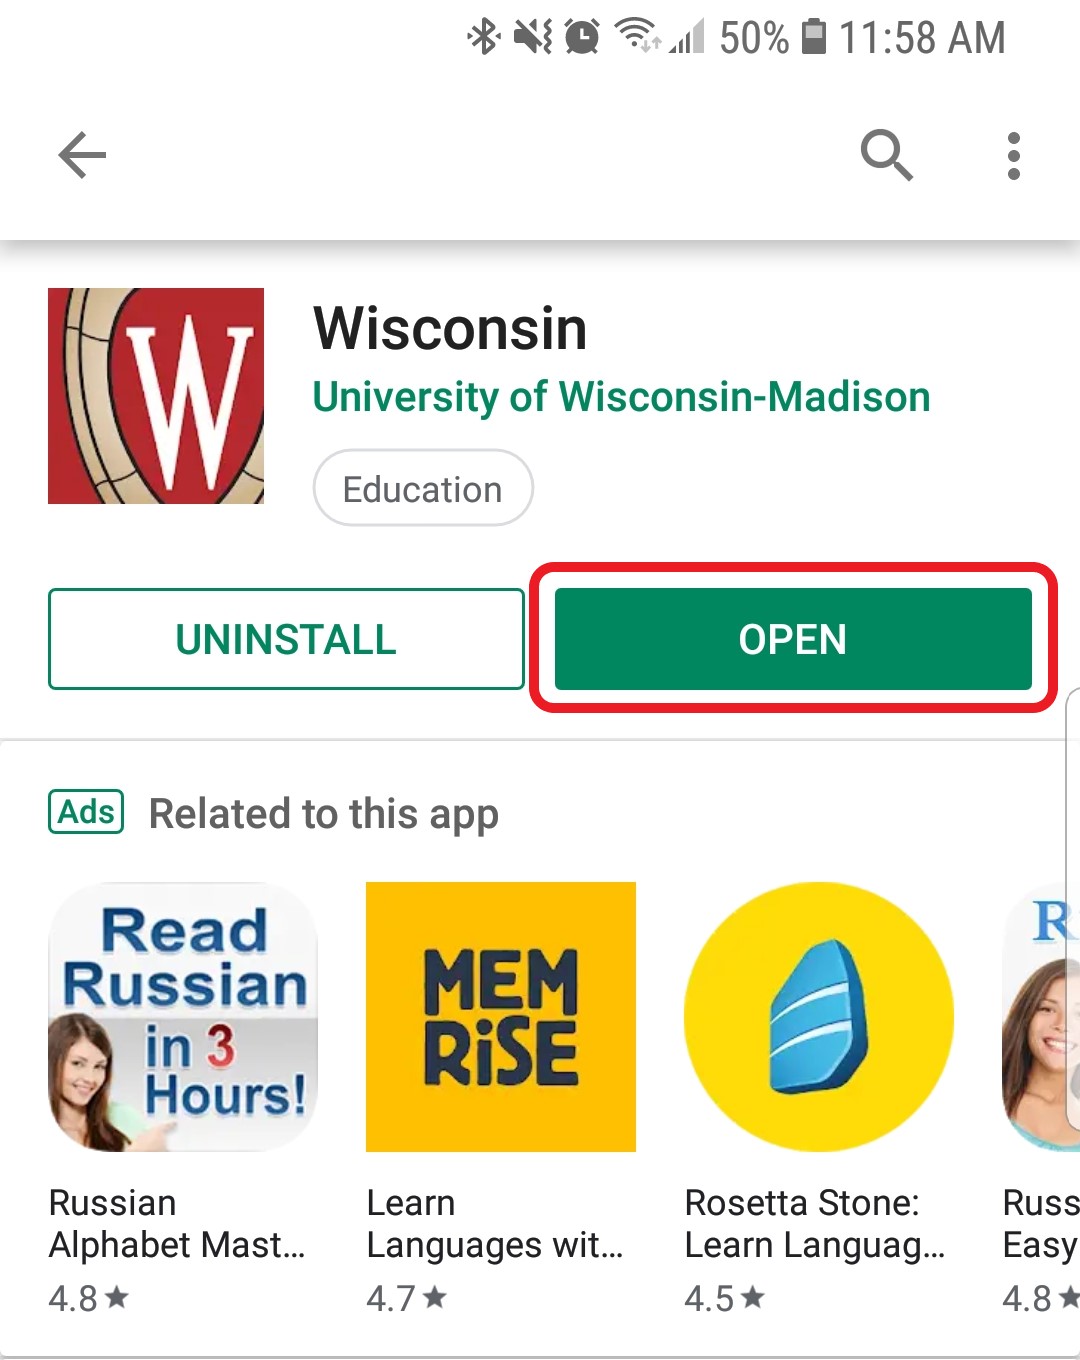 The Wisconsin App is ready to be opened